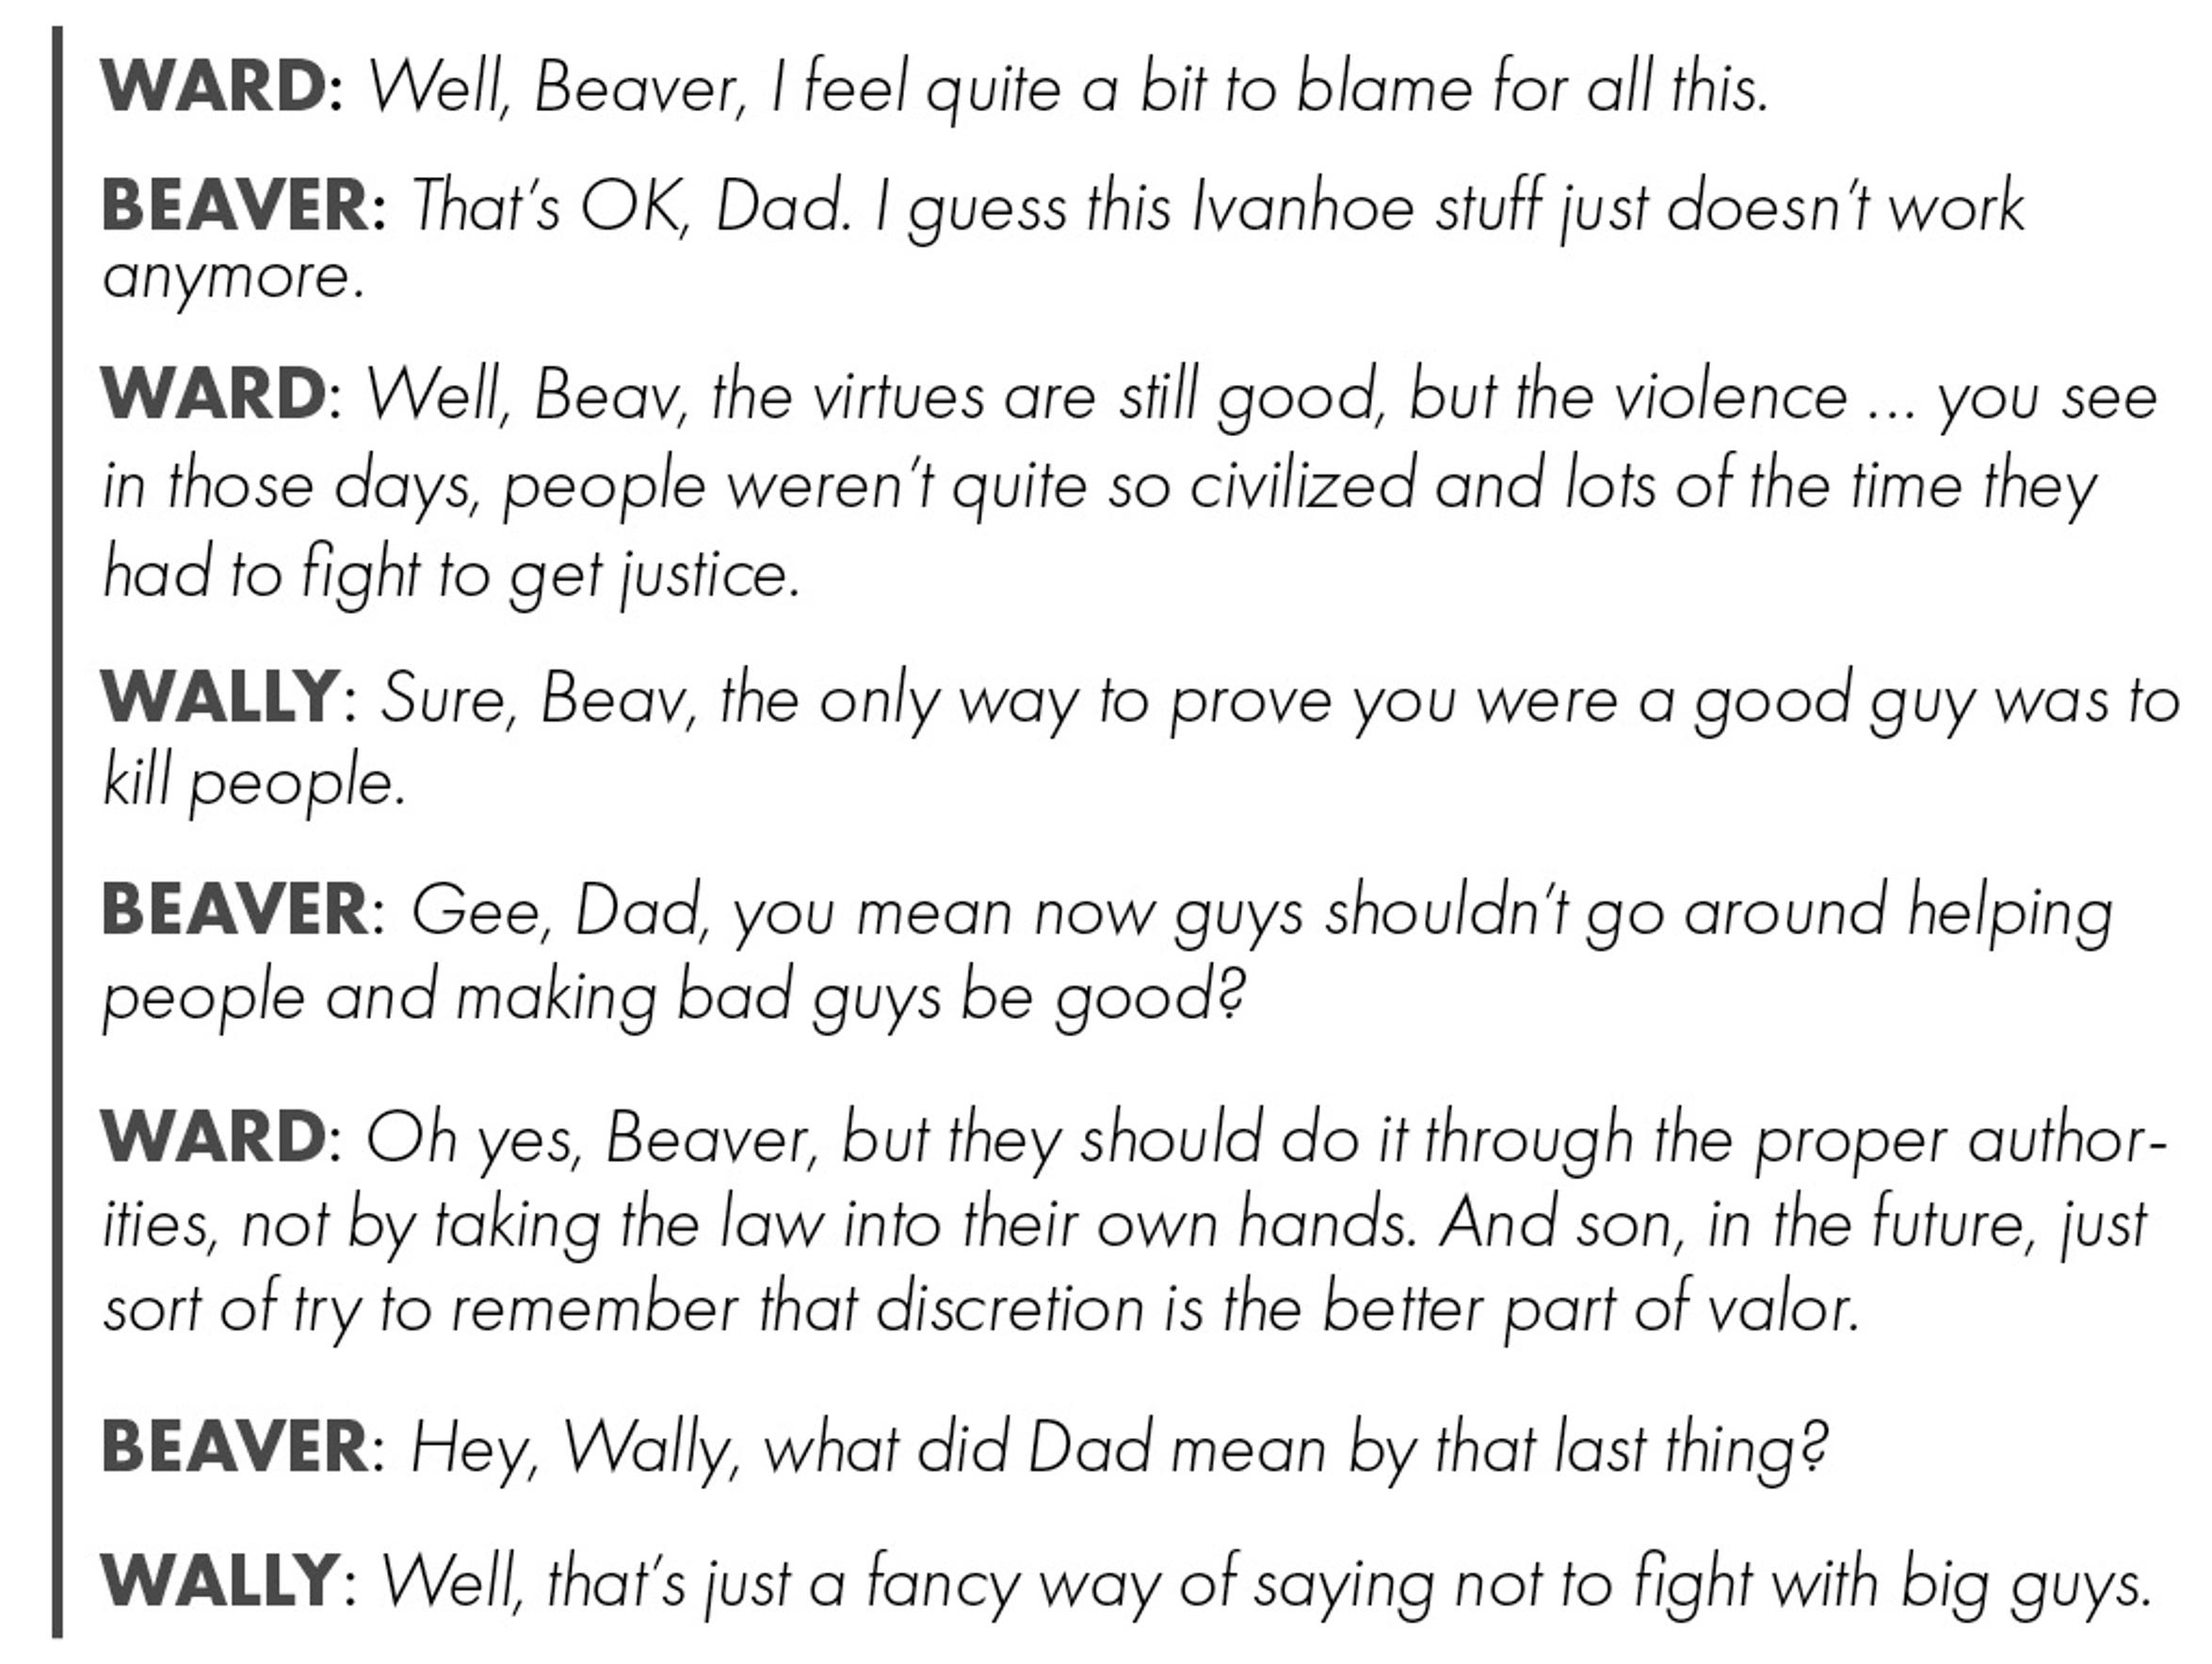 Dialogue from the iconic show, 'Leave It to Beaver,'